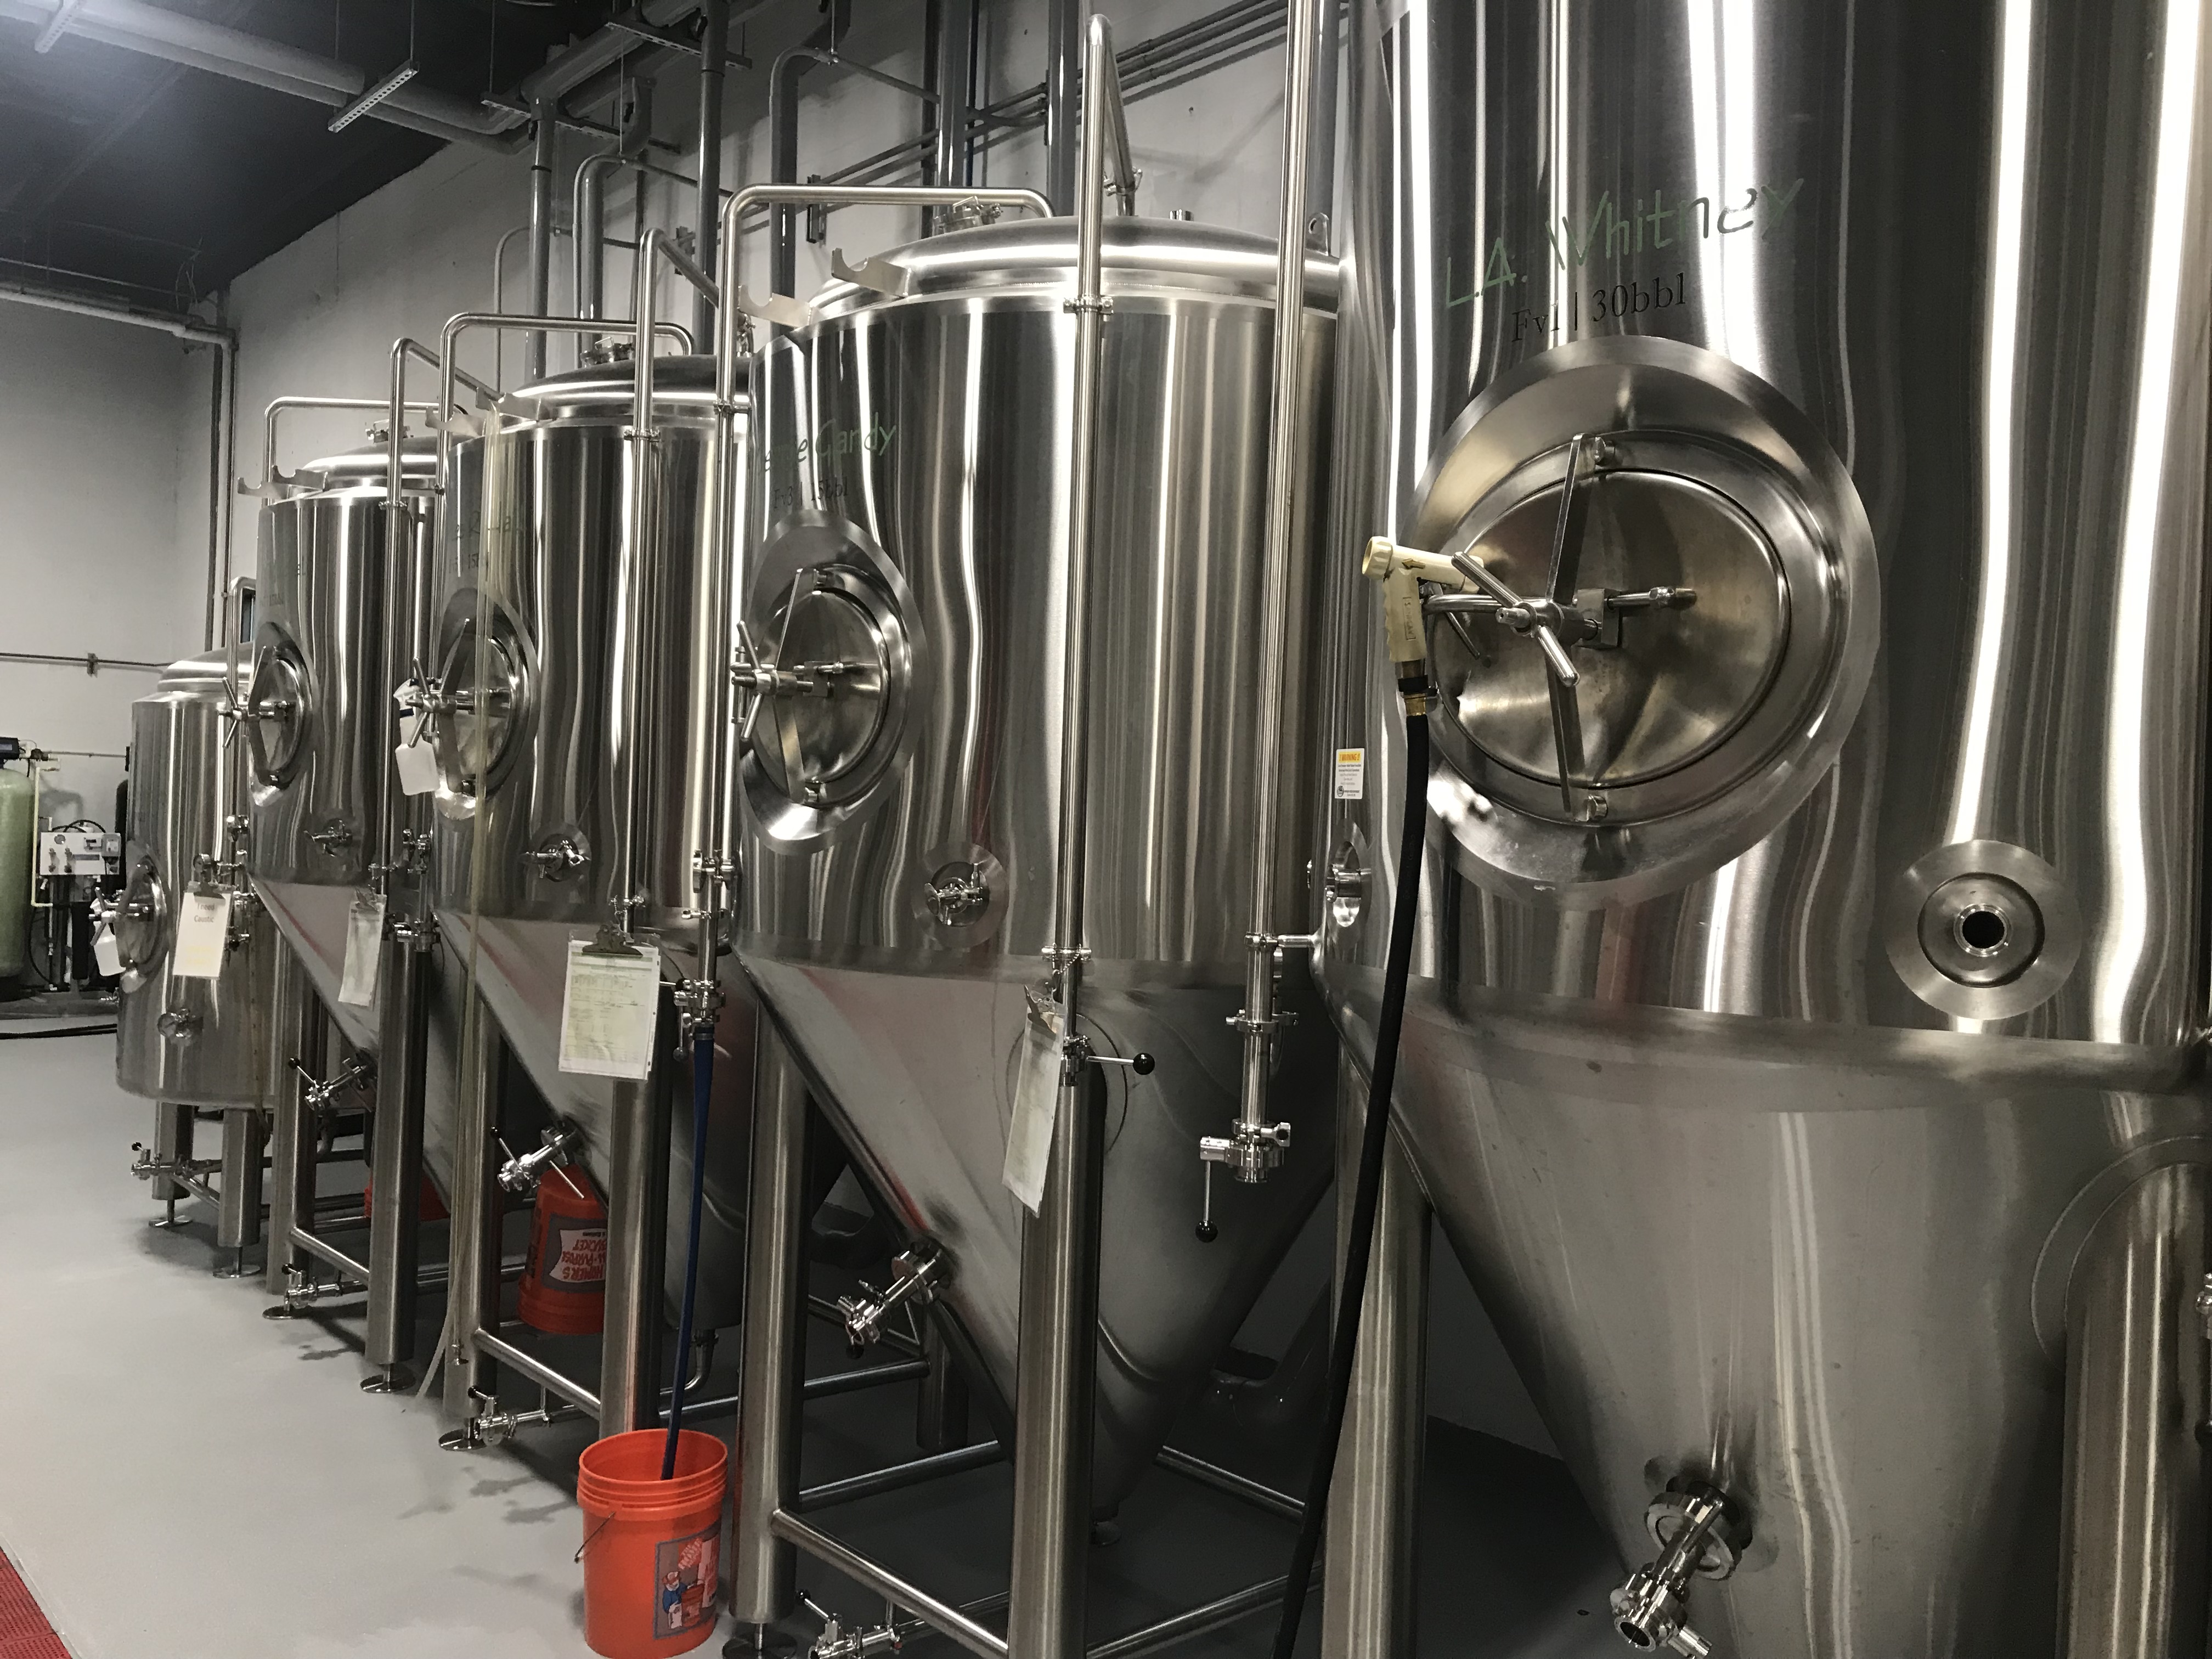 Each Brew Tank was named after one of the individuals involved in the first commercial flight